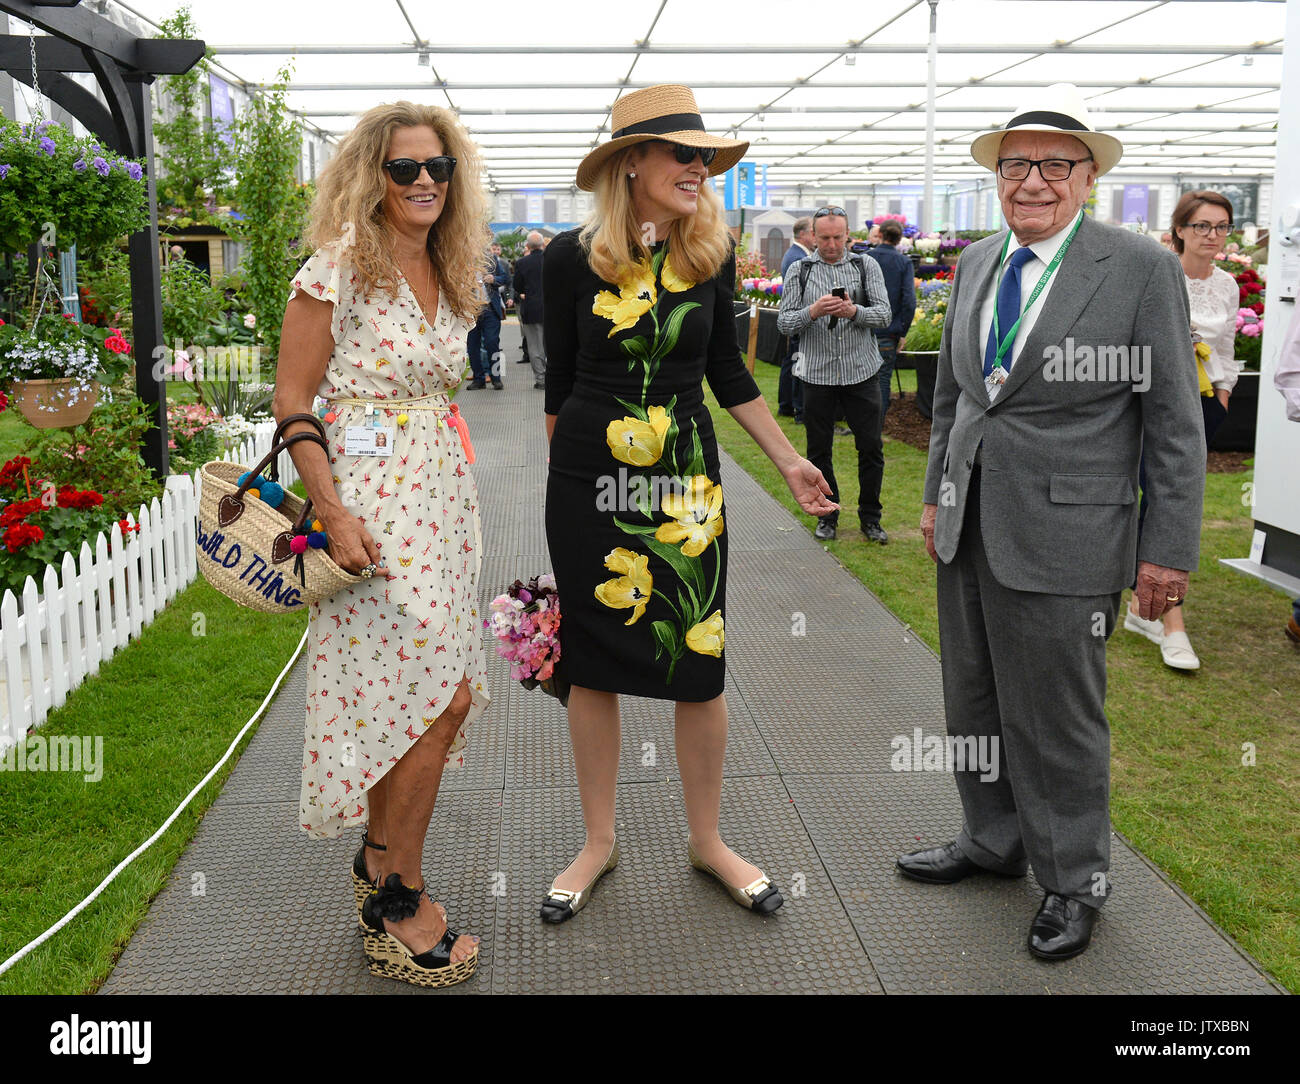 Rupert Murdoch the Australian-born American media mogul visits the Chelsea Flower Show with his wife Jerry Hall the American model and actress. Stock Photo